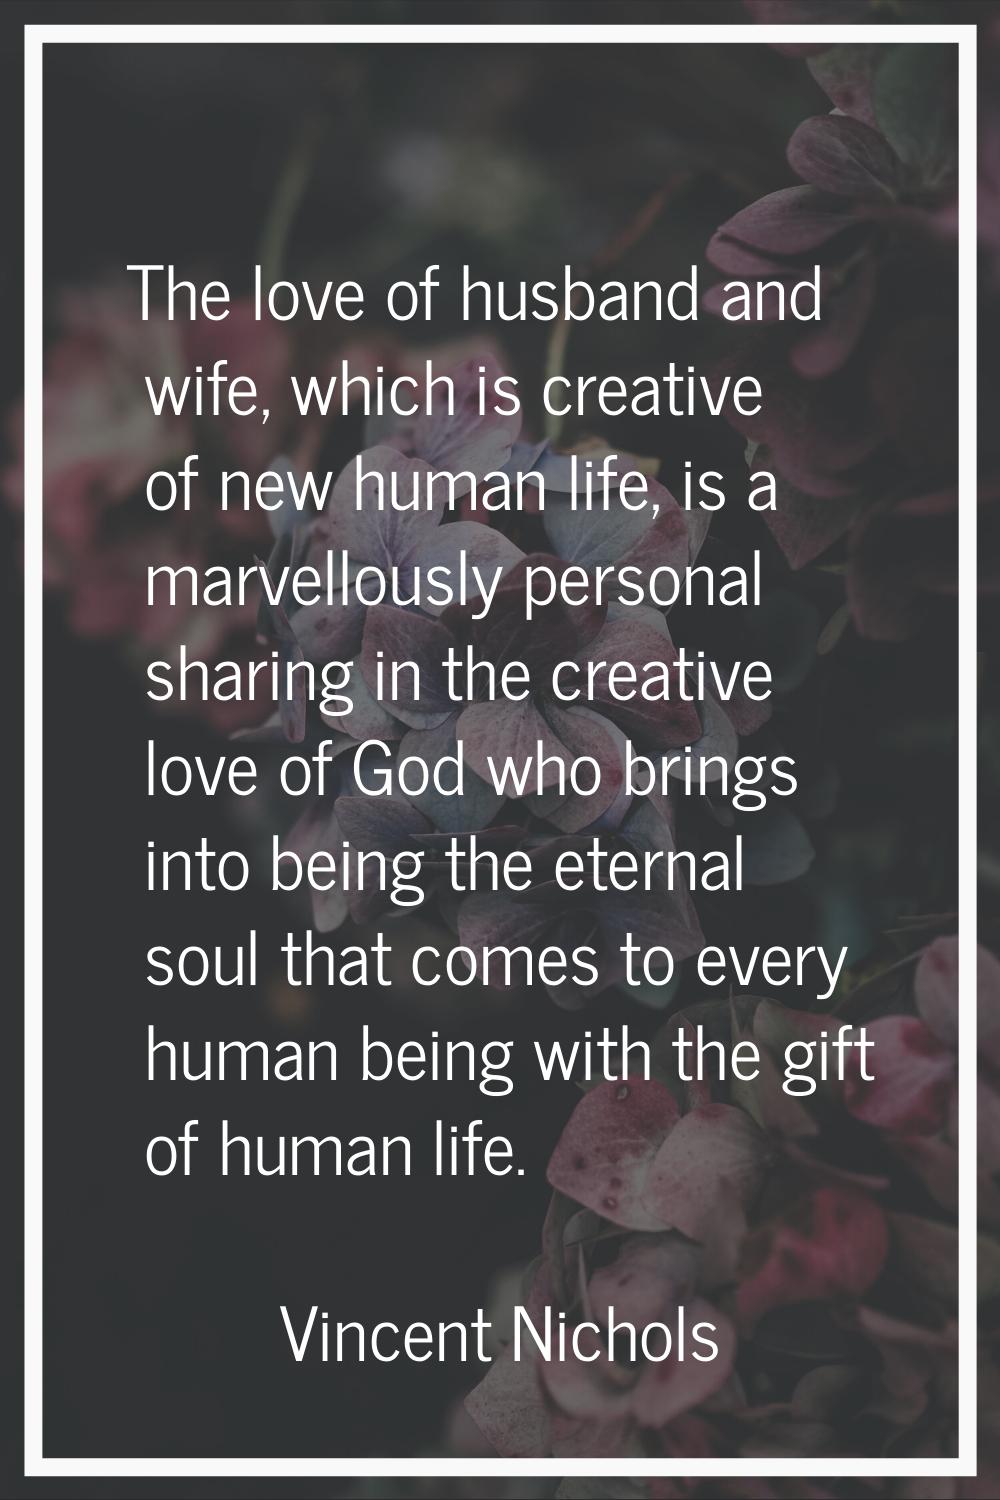 The love of husband and wife, which is creative of new human life, is a marvellously personal shari